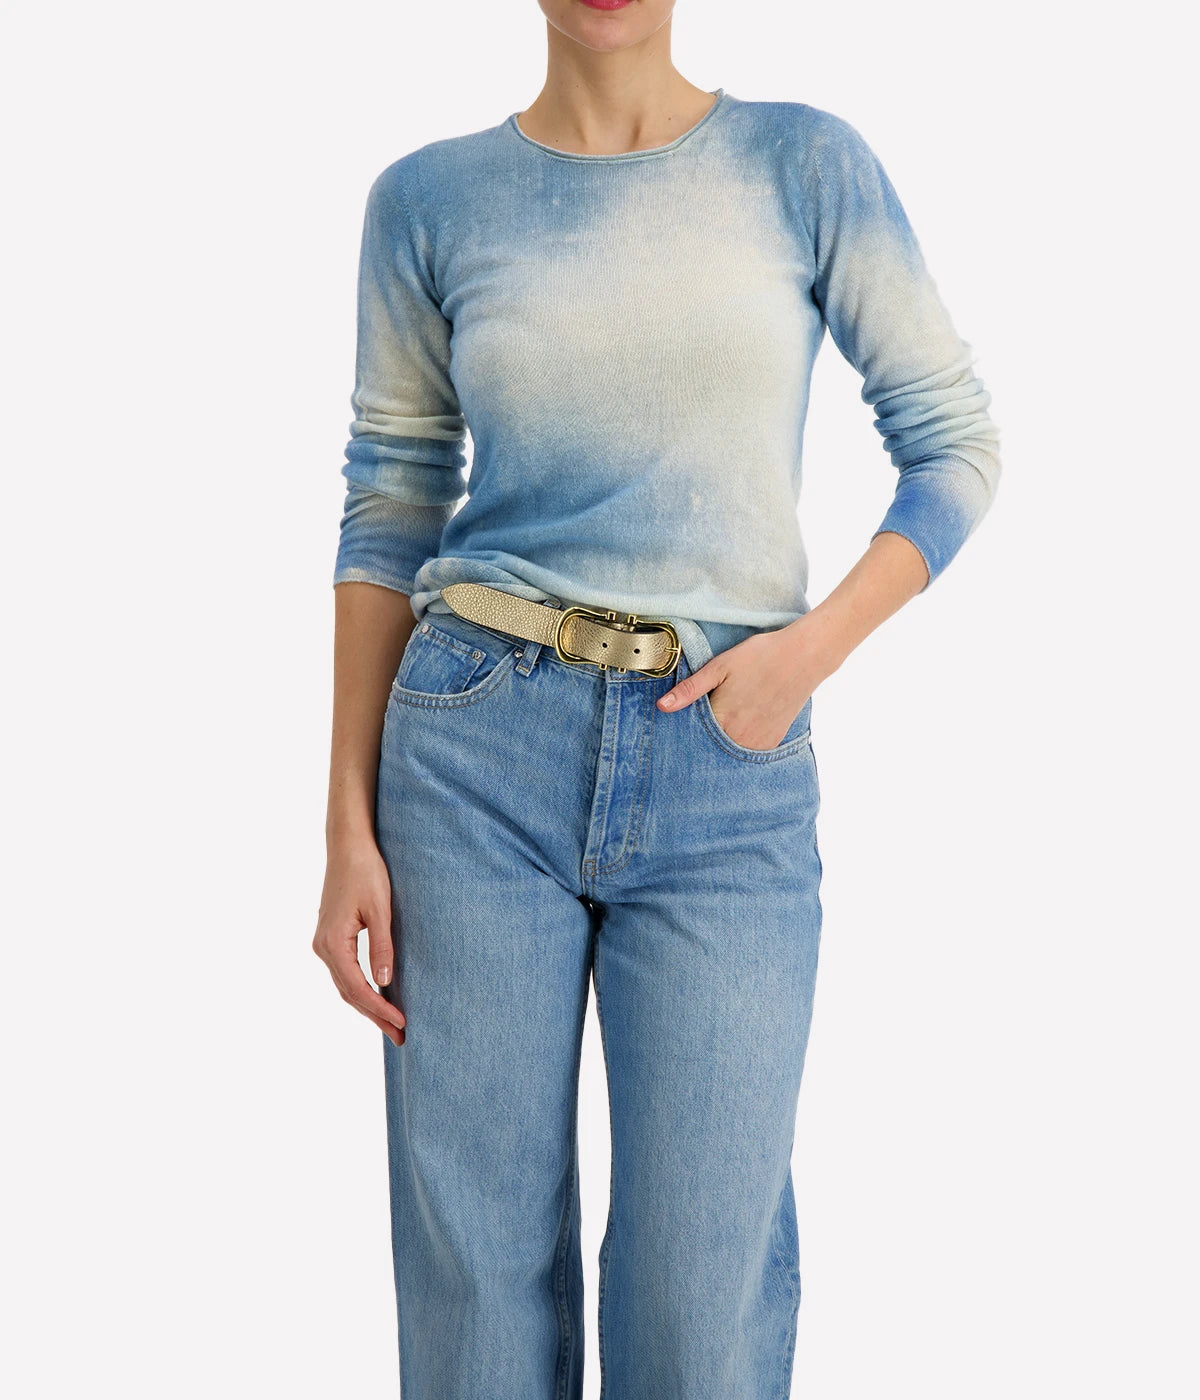 100% cashmere slim cut white and blue longsleeve knit jumper by Avant Toi.